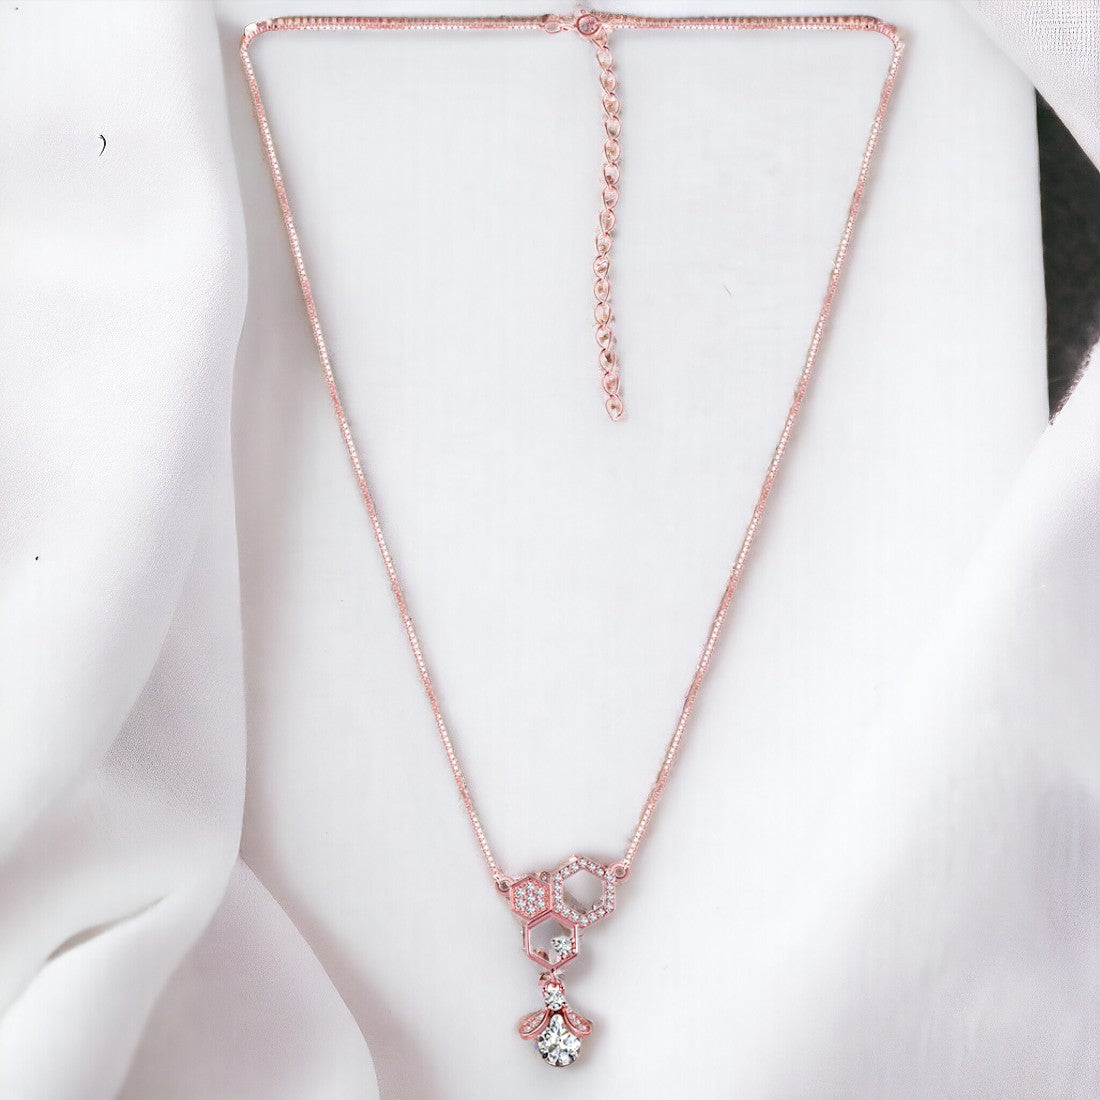 Rosegold Bee Hanging Hive Chain Pendant For Women & Girls